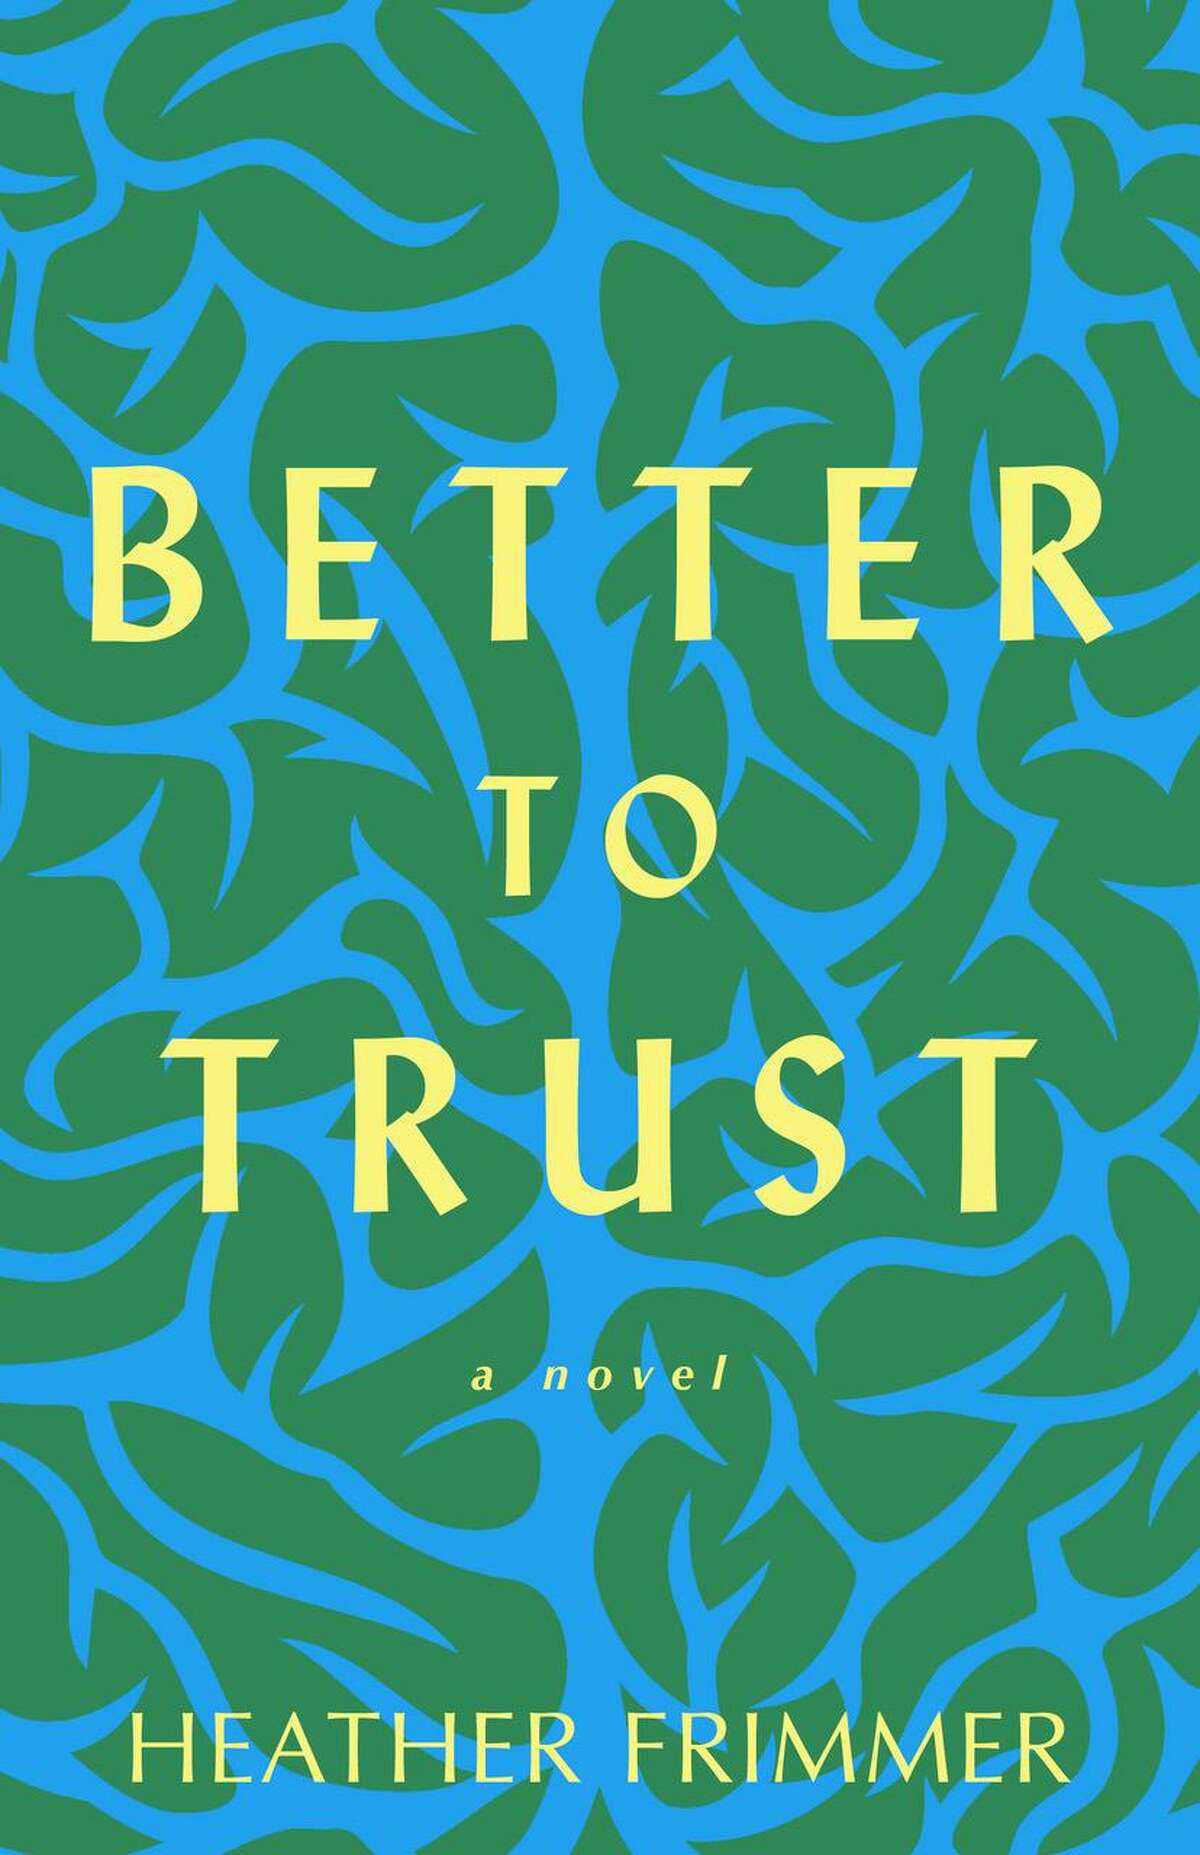 Weston resident -- and radiologist -- Heather Frimmer has published her second novel, "Better to Trust."